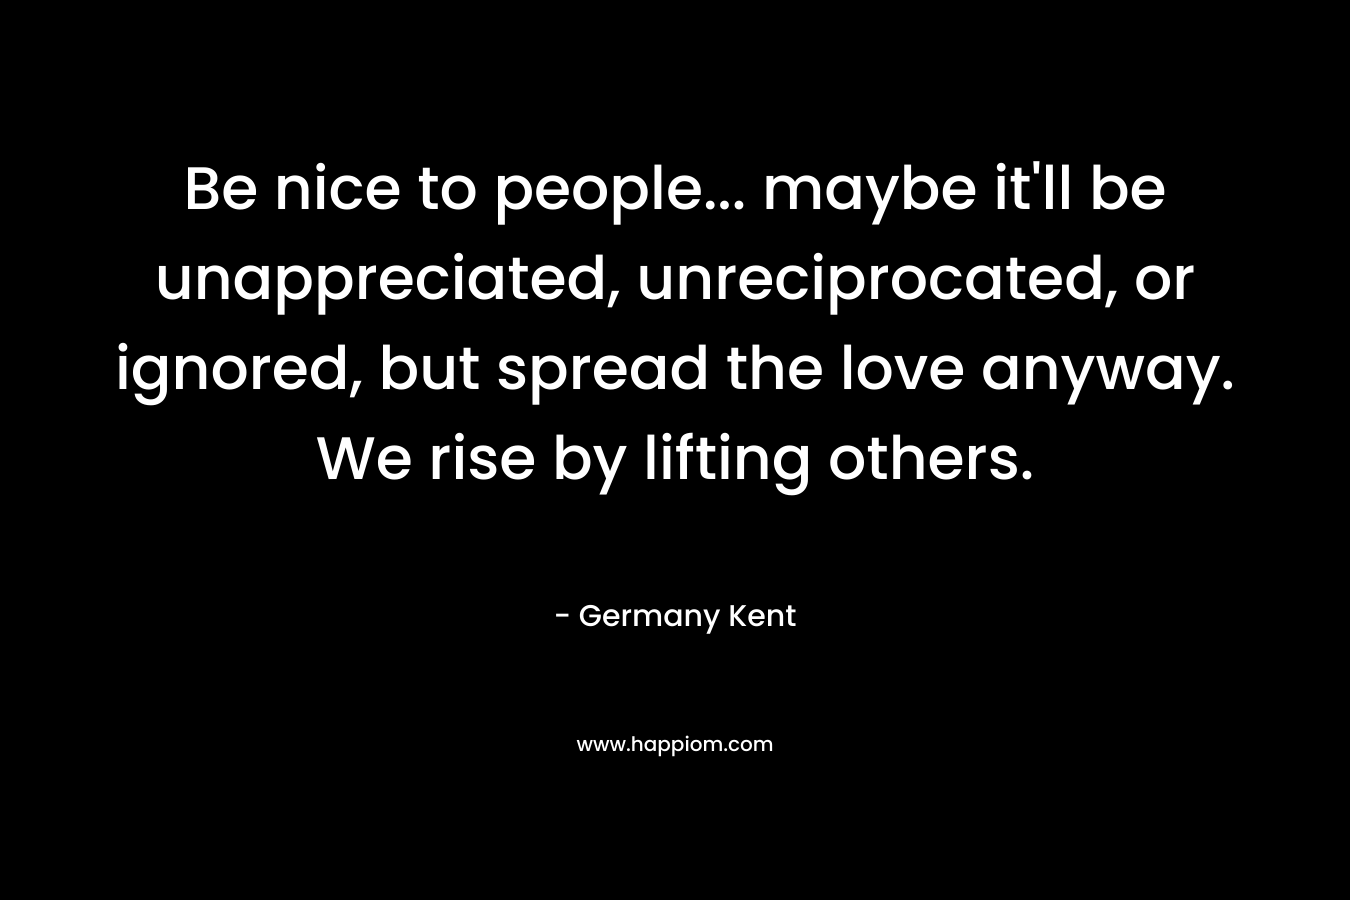 Be nice to people... maybe it'll be unappreciated, unreciprocated, or ignored, but spread the love anyway. We rise by lifting others.